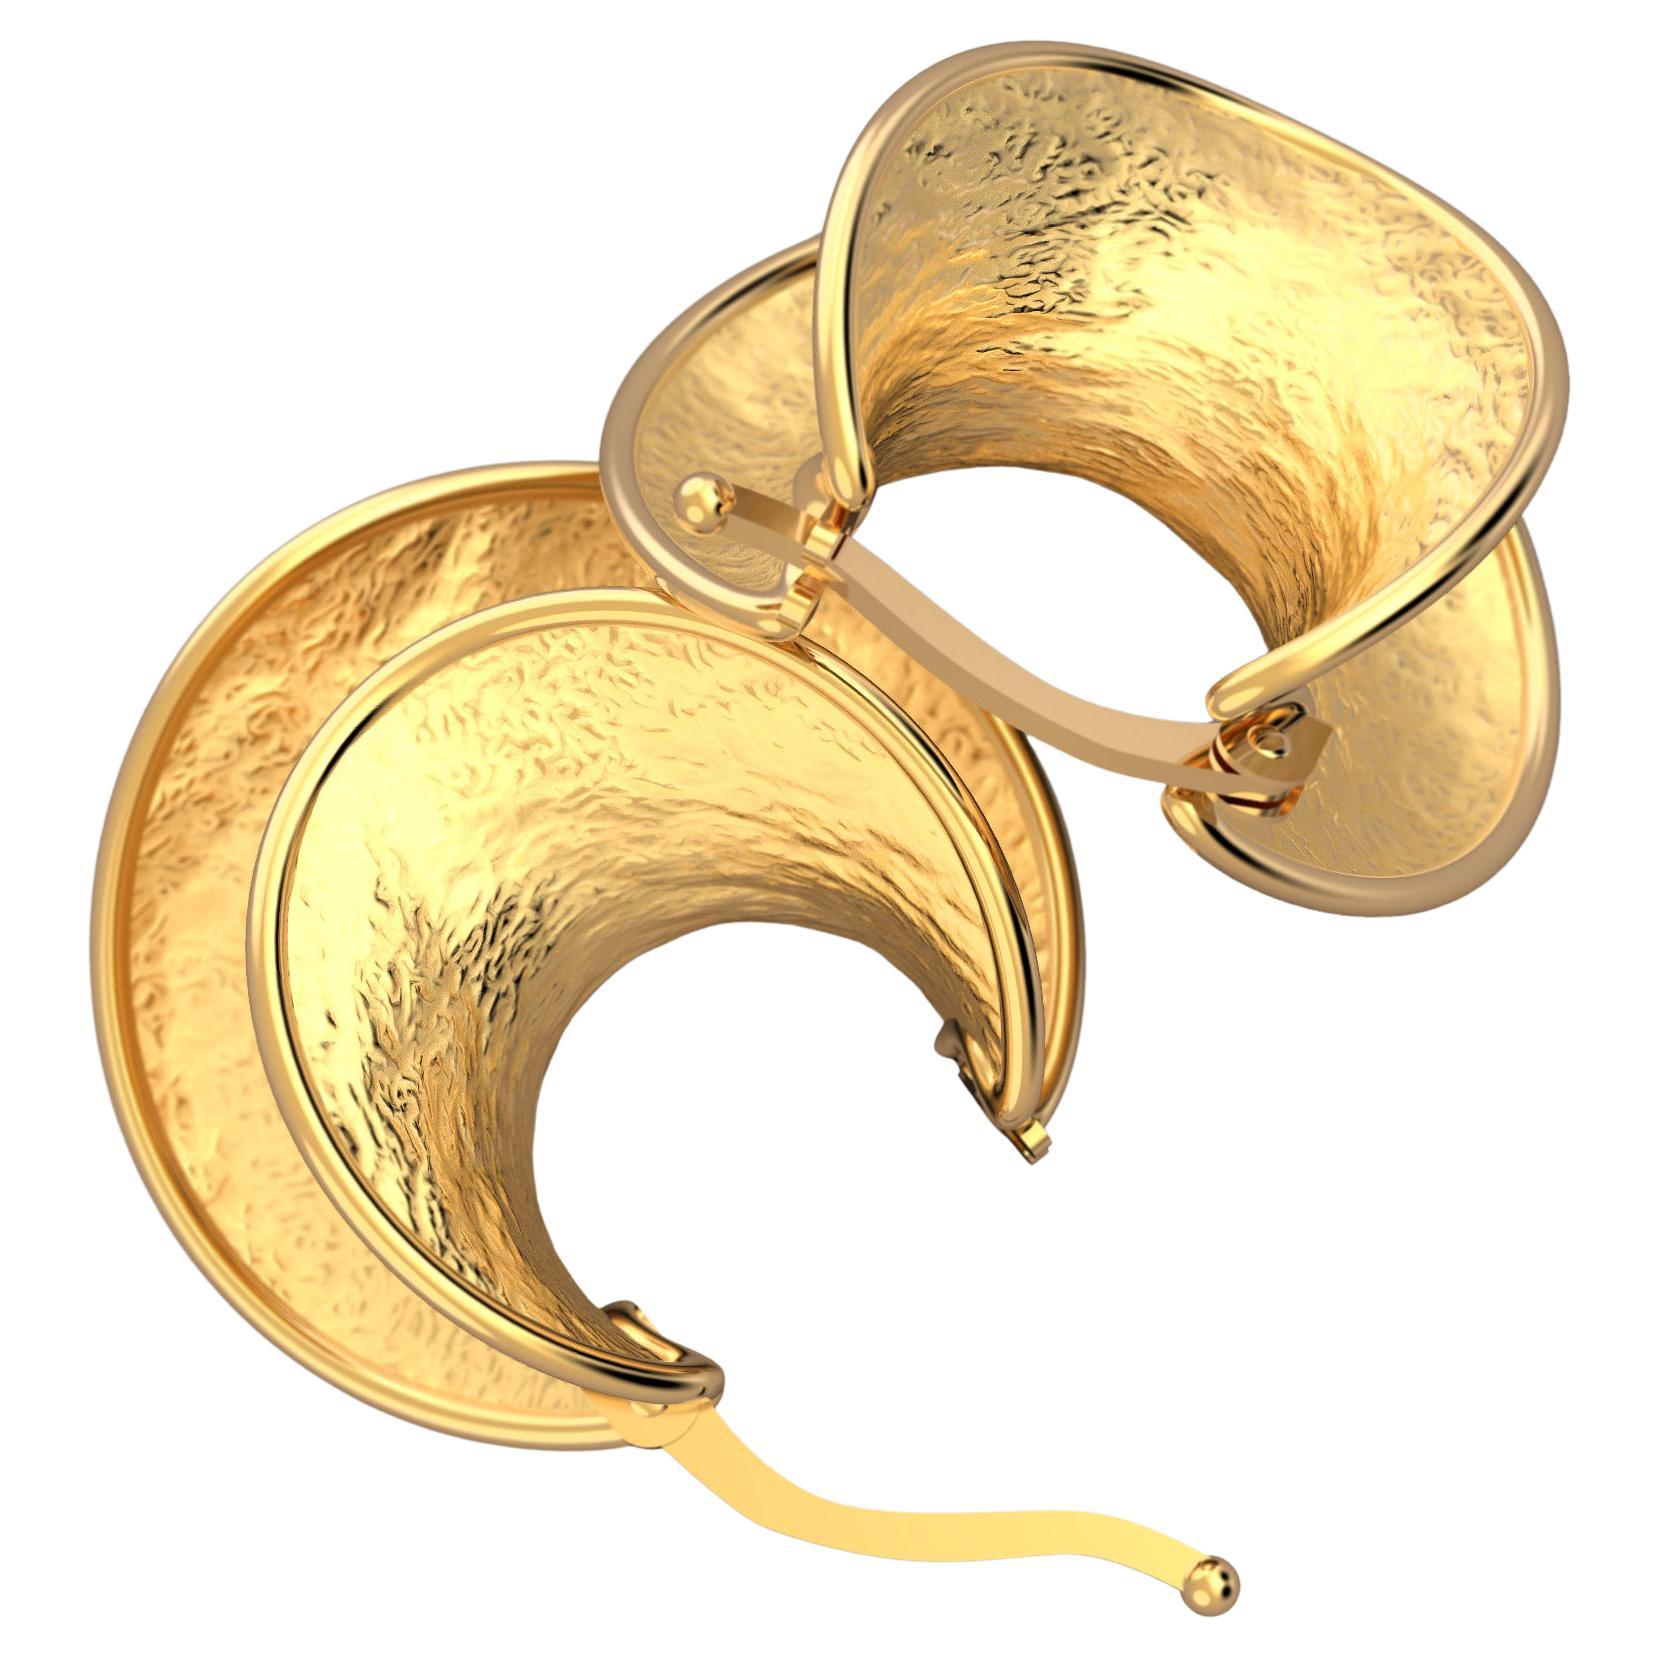  Made to order 21 mm diameter beautiful hoop earrings crafted in polished and raw solid gold 18k 
Available in yellow gold, rose gold and white gold
The earrings are secured by a trusty snap closure.
The approximate total weight is 5,5 grams in 18k